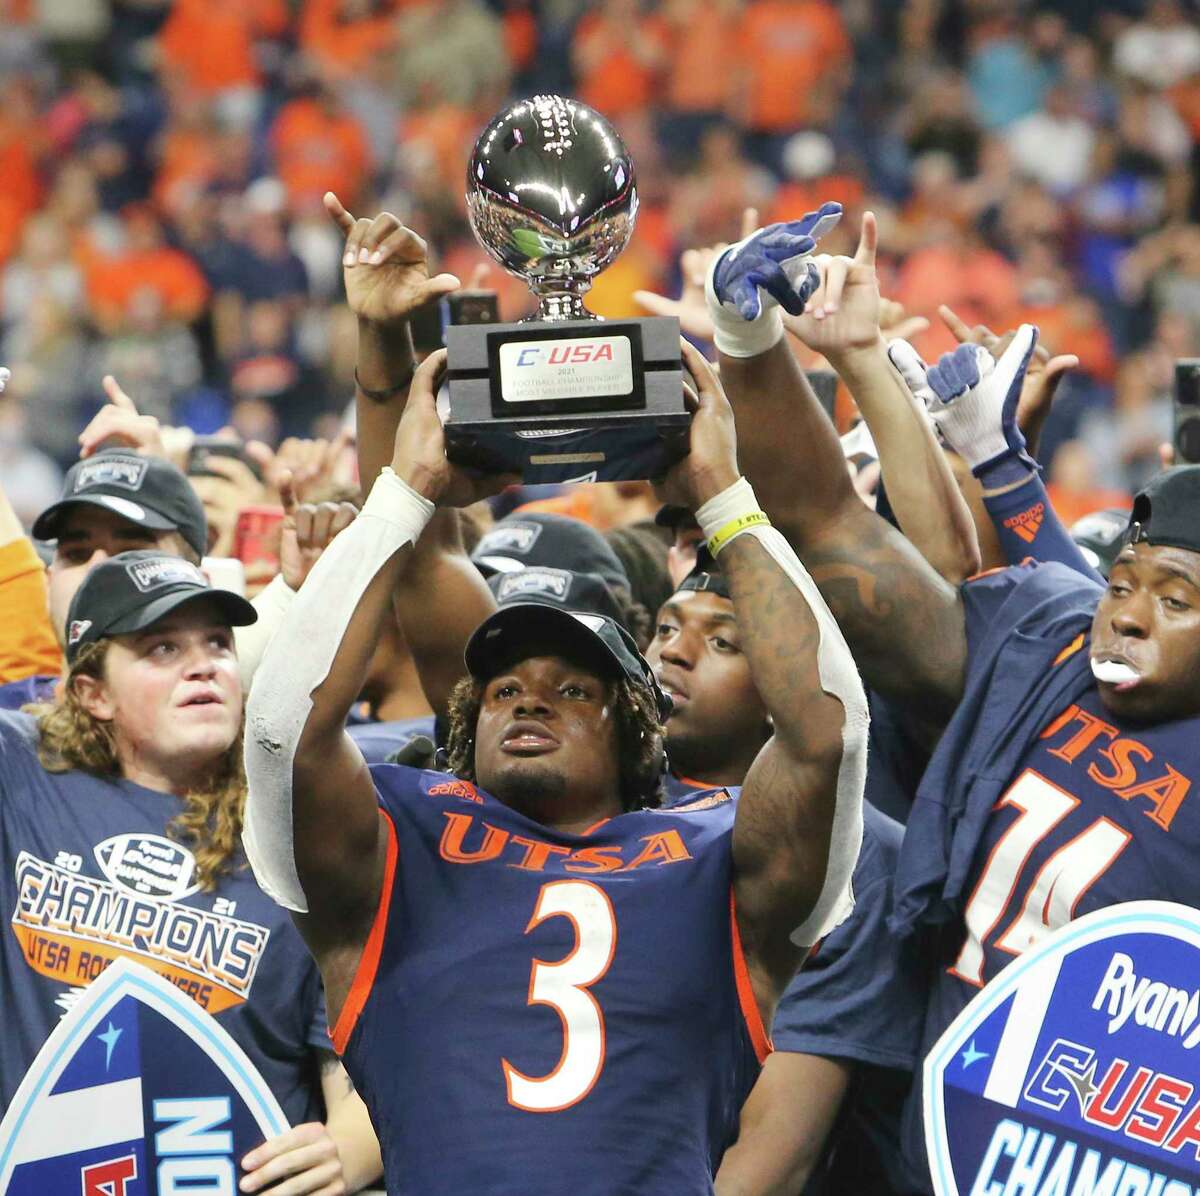 UTSA Running Back Sincere McCormick said it best: “This is for San Antonio.”